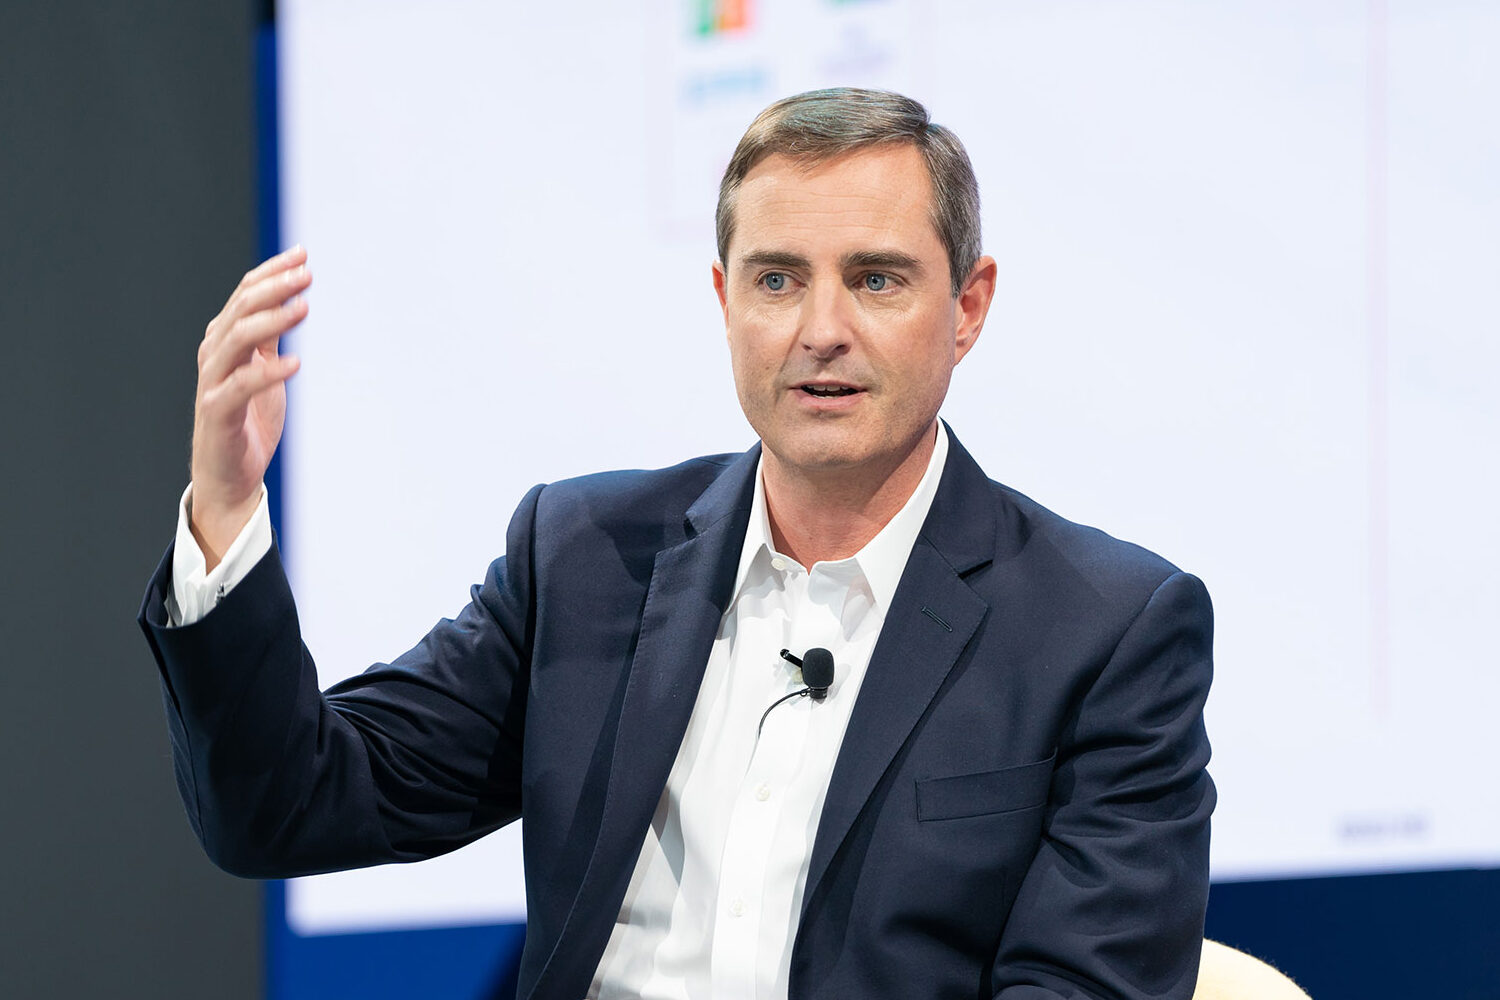 IHG CEO Keith Barr on stage at Skift Global Forum On September 21, 2022 in New York City. Source: Skift.